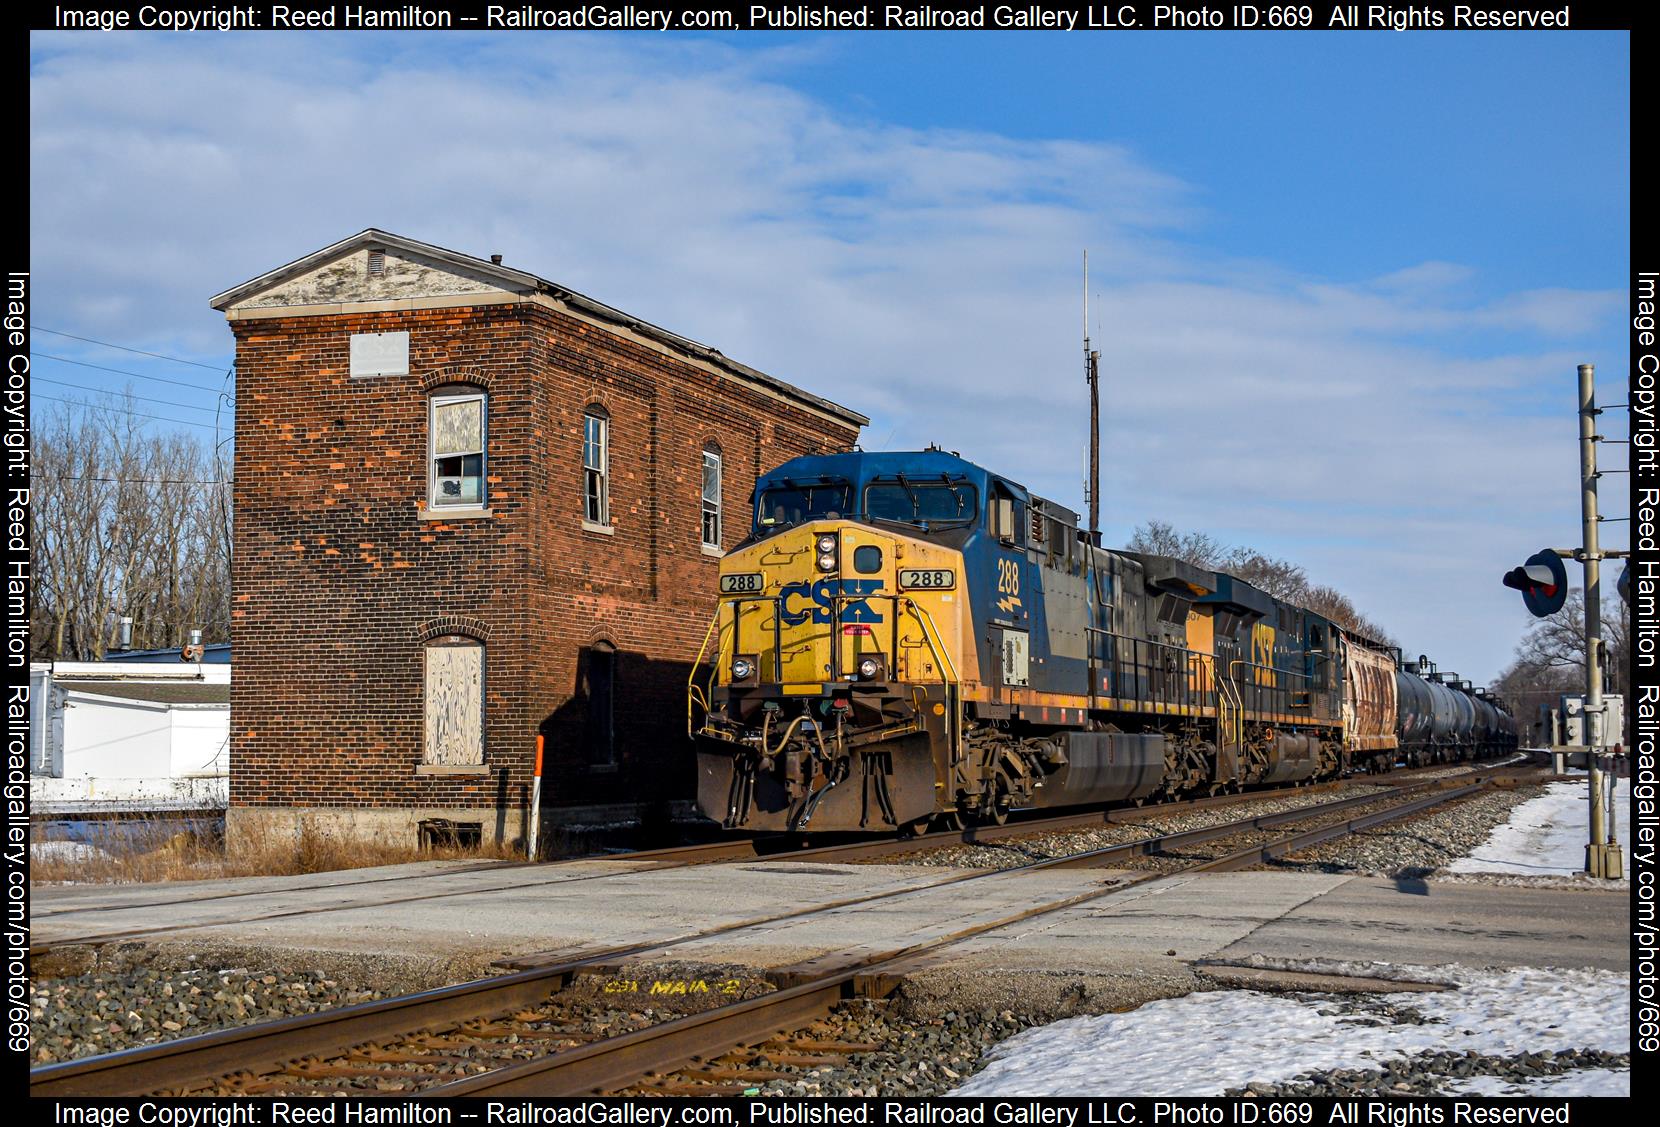 CSXT 288 is a class GE AC4400CW and  is pictured in Walkerton, IN, United States.  This was taken along the Garrett/Willard Subdivision on the CSX Transportation. Photo Copyright: Reed Hamilton uploaded to Railroad Gallery on 02/05/2023. This photograph of CSXT 288 was taken on Monday, February 14, 2022. All Rights Reserved. 